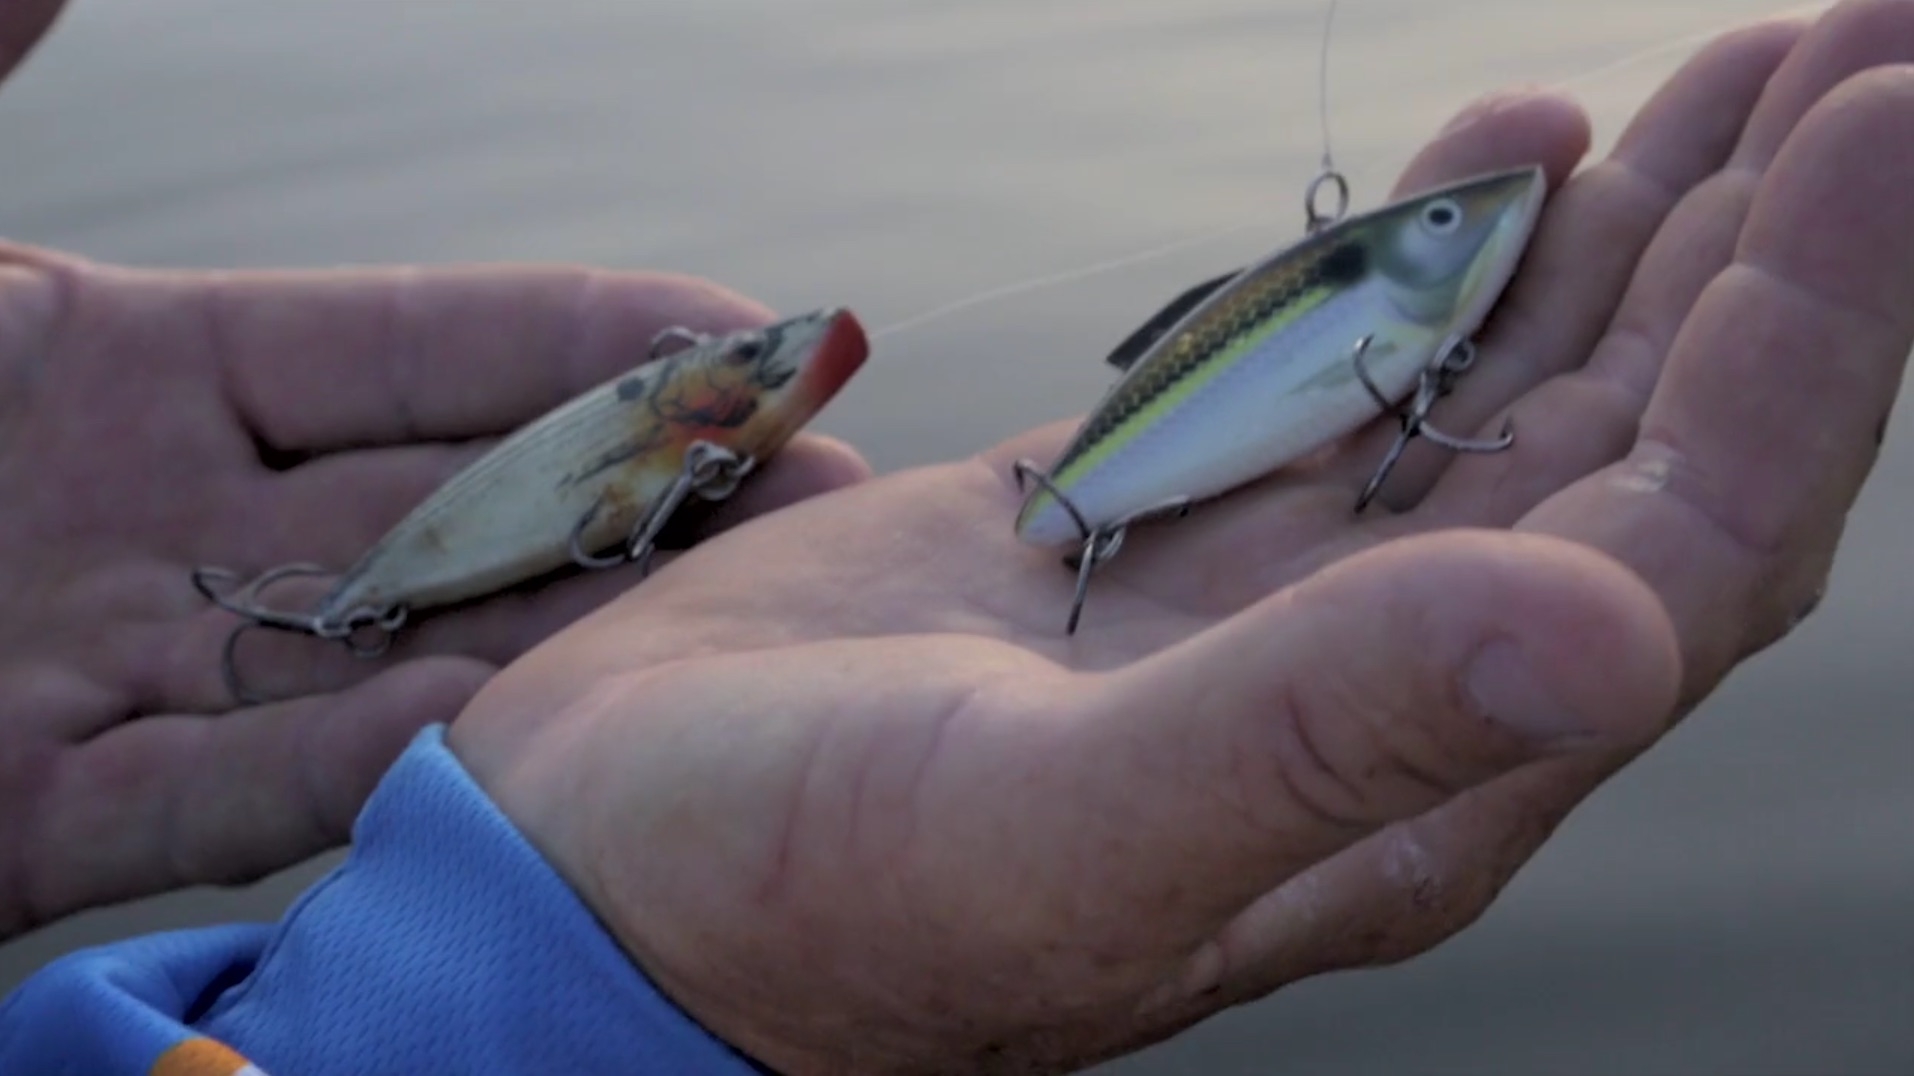 Certified Biodegradable Fishing Lures! Could This Disrupt The Entire Fishing  Lure Industry?